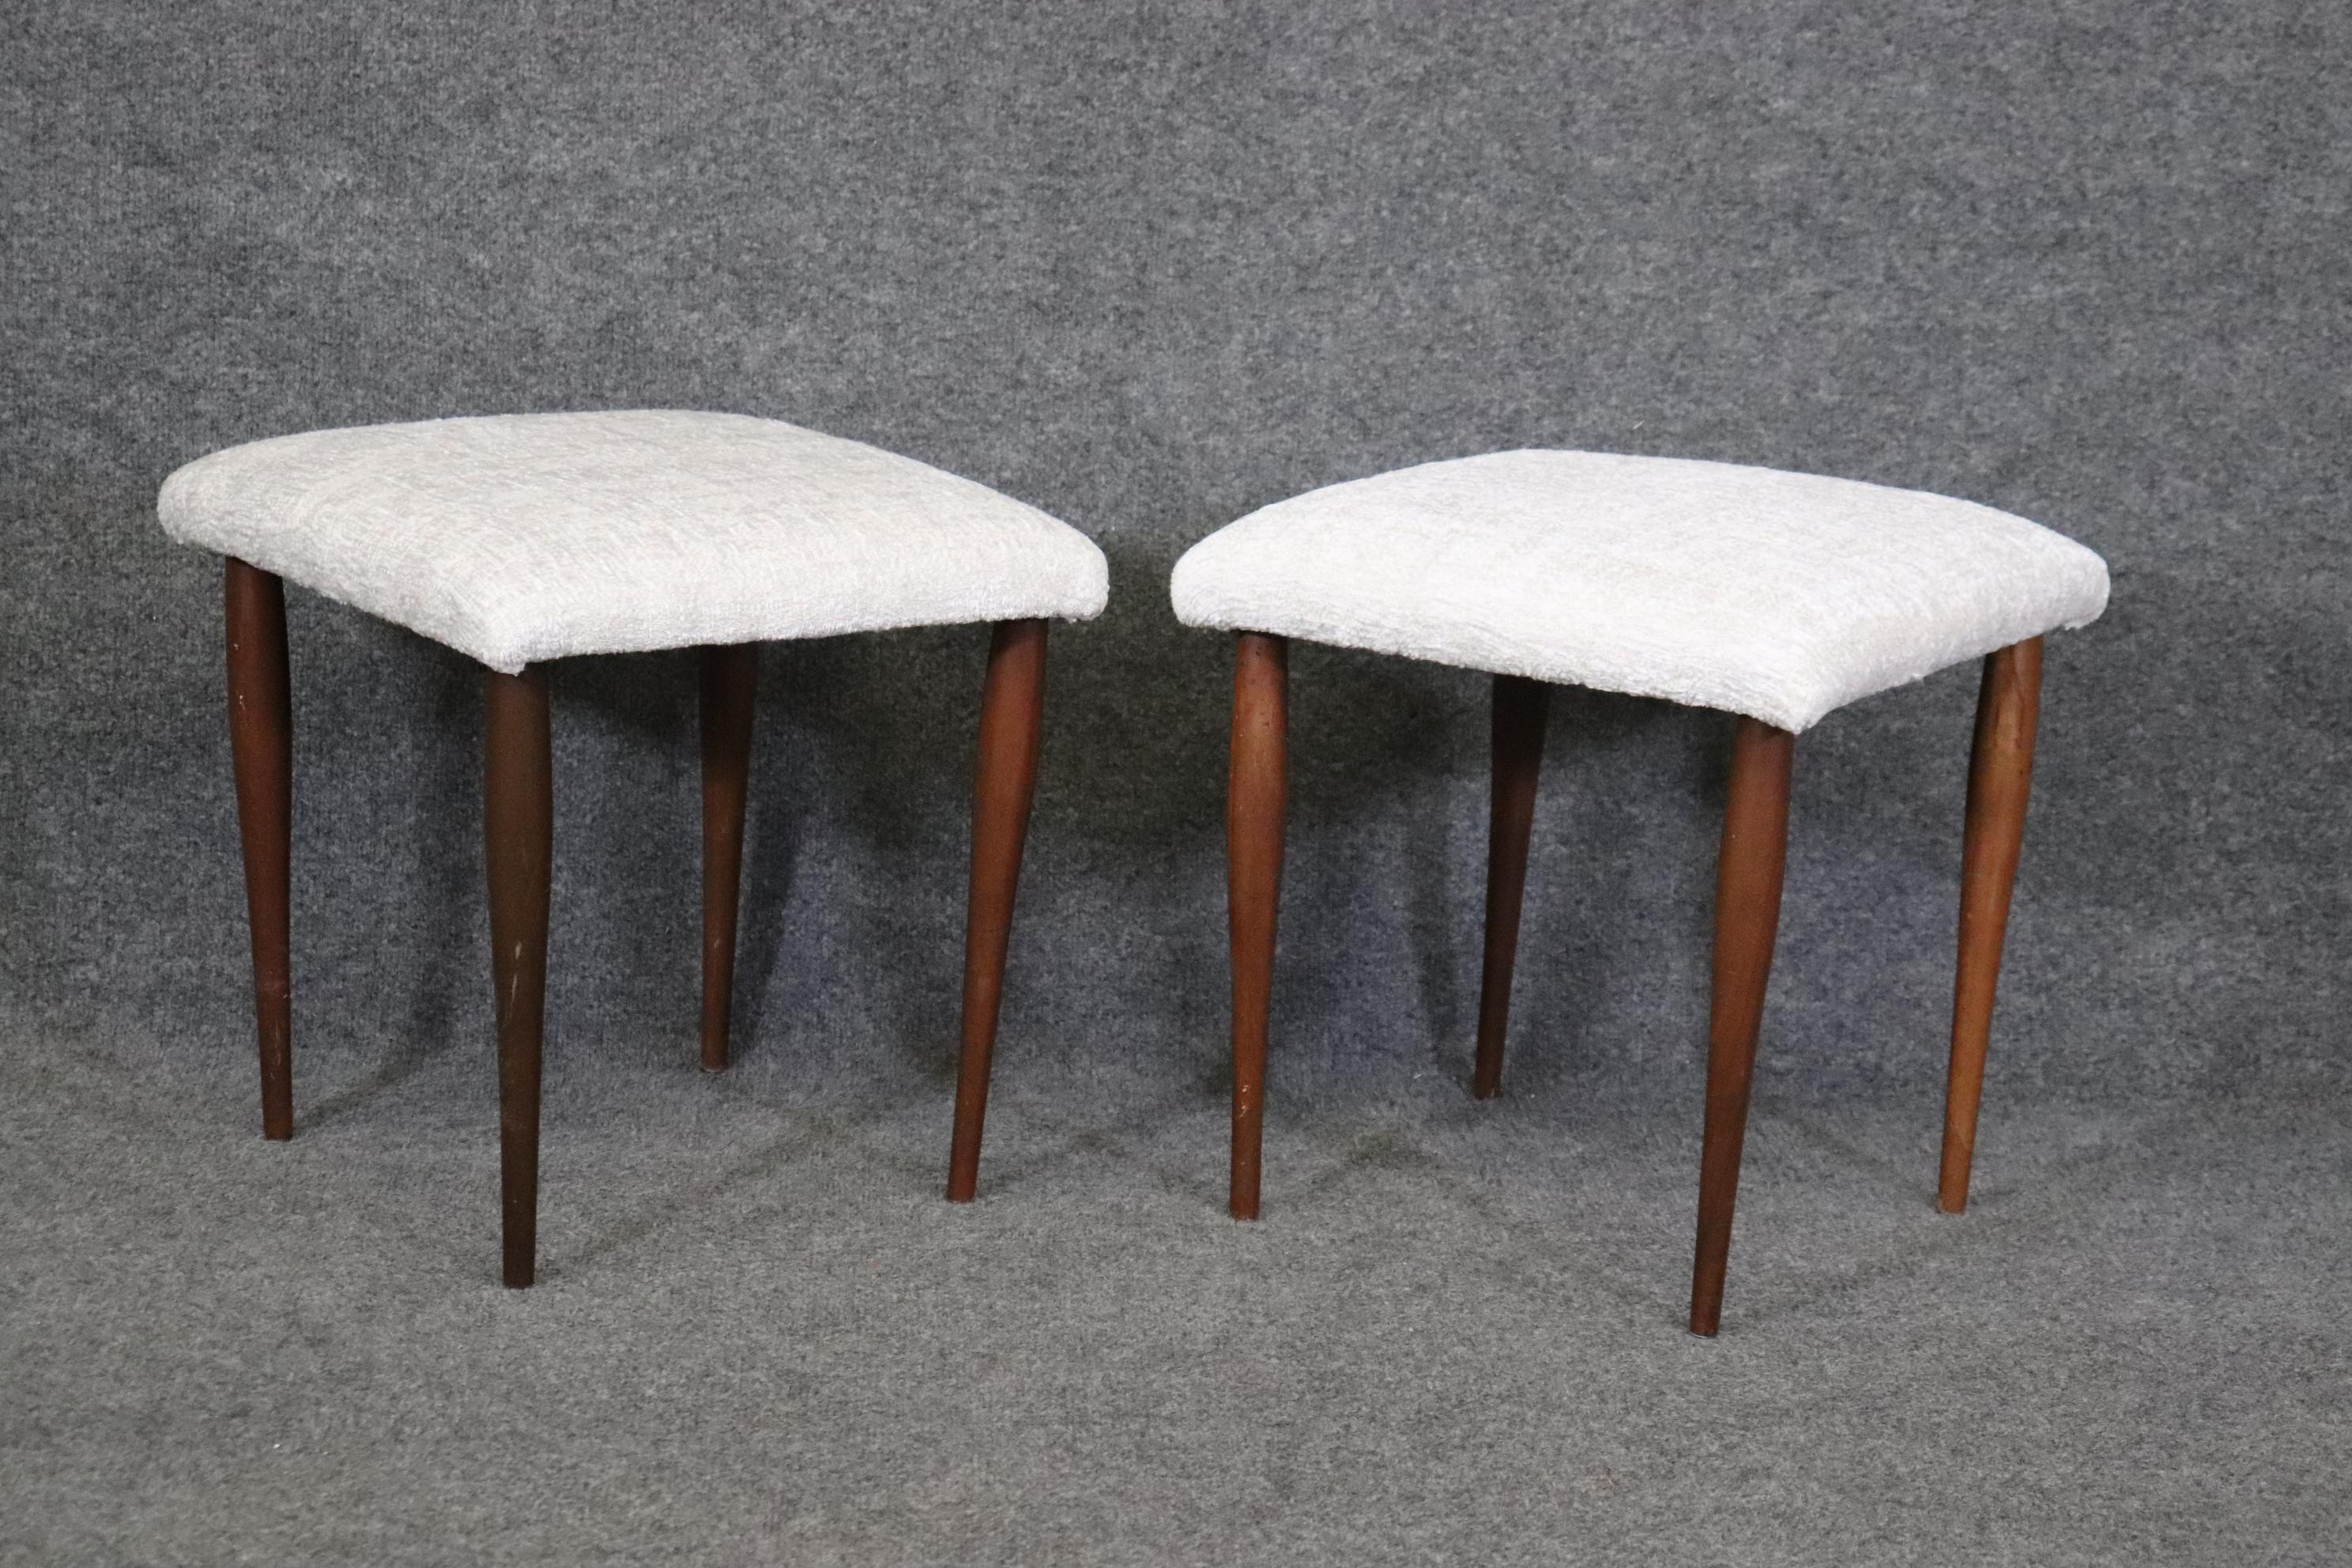 Dimensions- H: 16 1/22in W: 15 3/4in D: 15 1/2in 

This pair of Mid Century Modern upholstered stools benches is truly unique and is bound to bring a creative sense of class and character into your home or place of choosing! This pair is perfect for